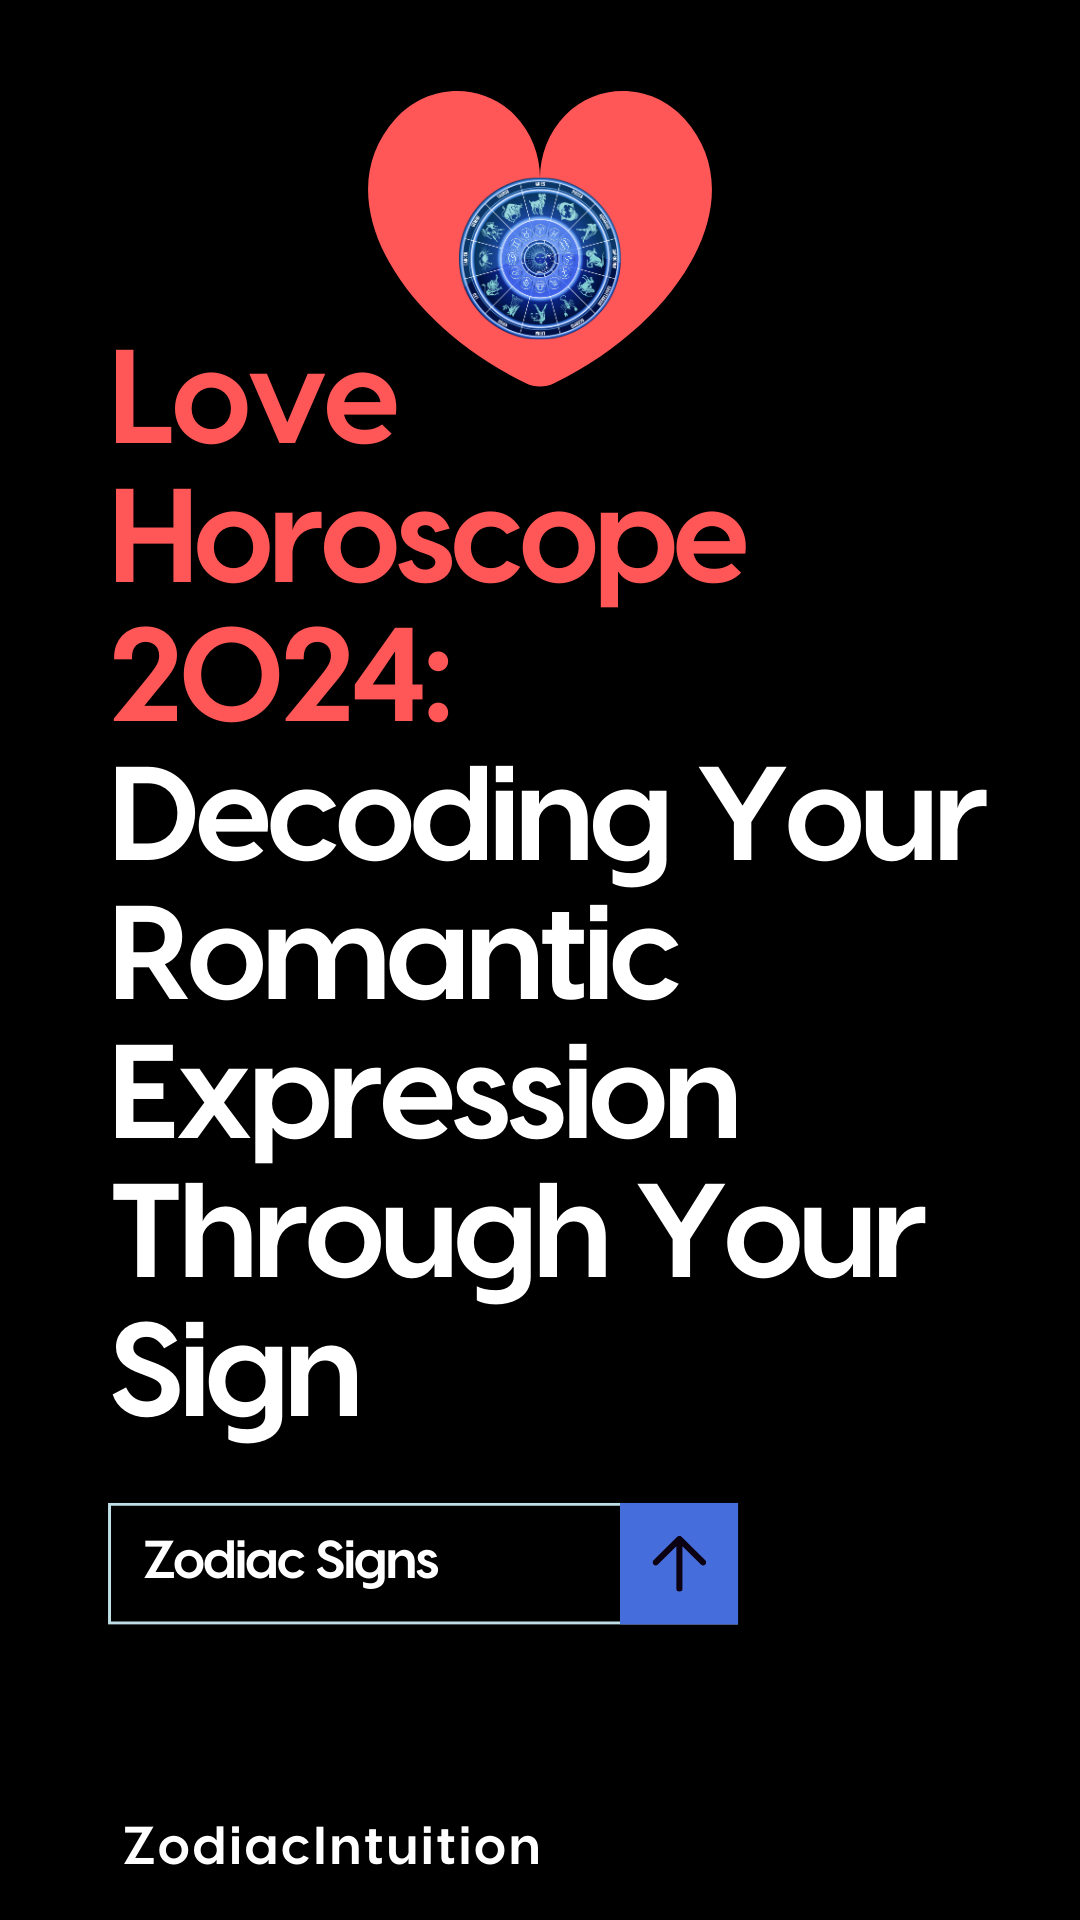 Love Horoscope 2024: Decoding Your Romantic Expression Through Your Sign